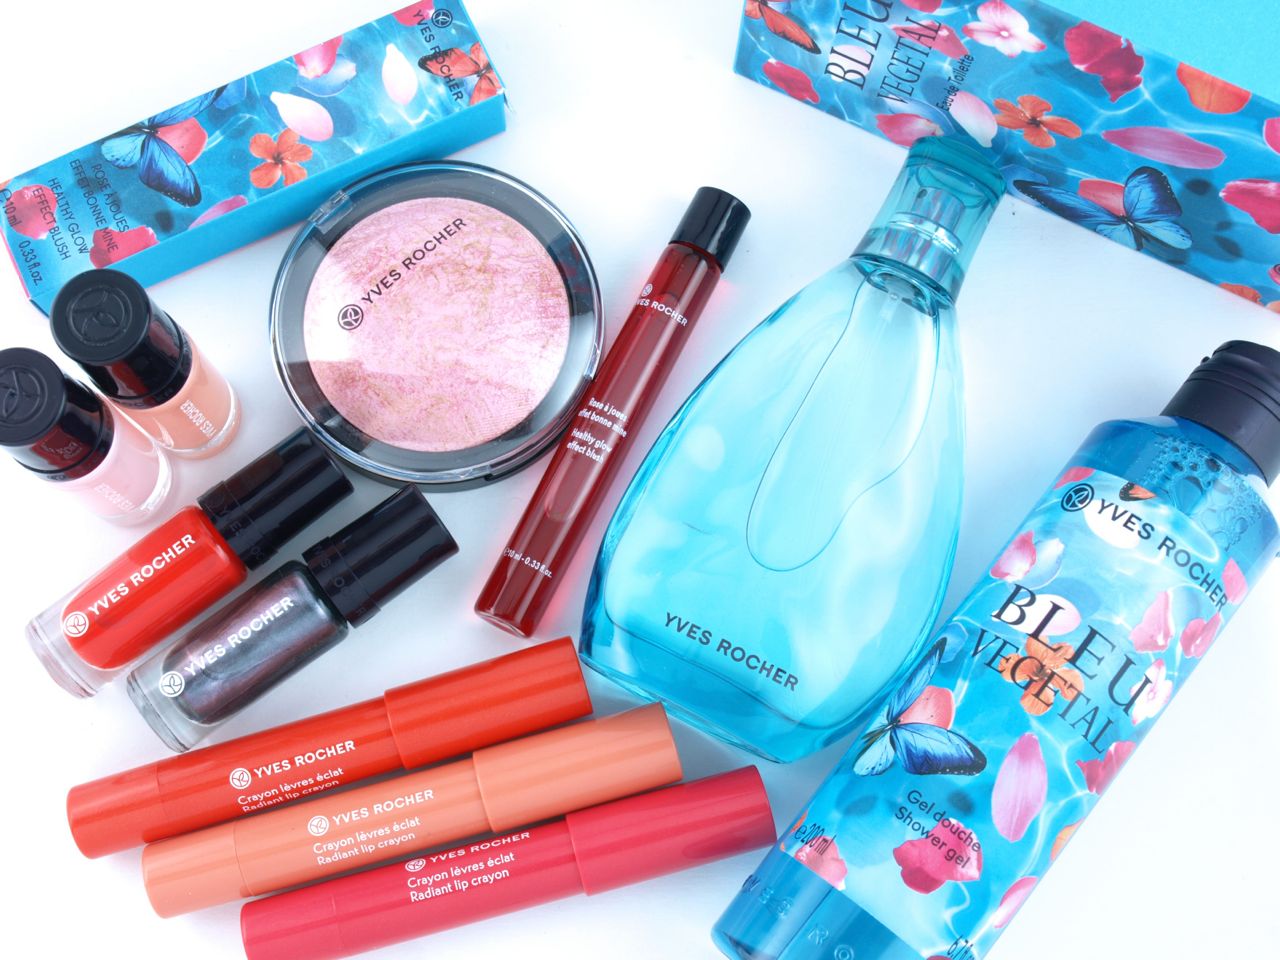 Yves Rocher Summer Creation 2015 Collection Roundup: Review and Swatches